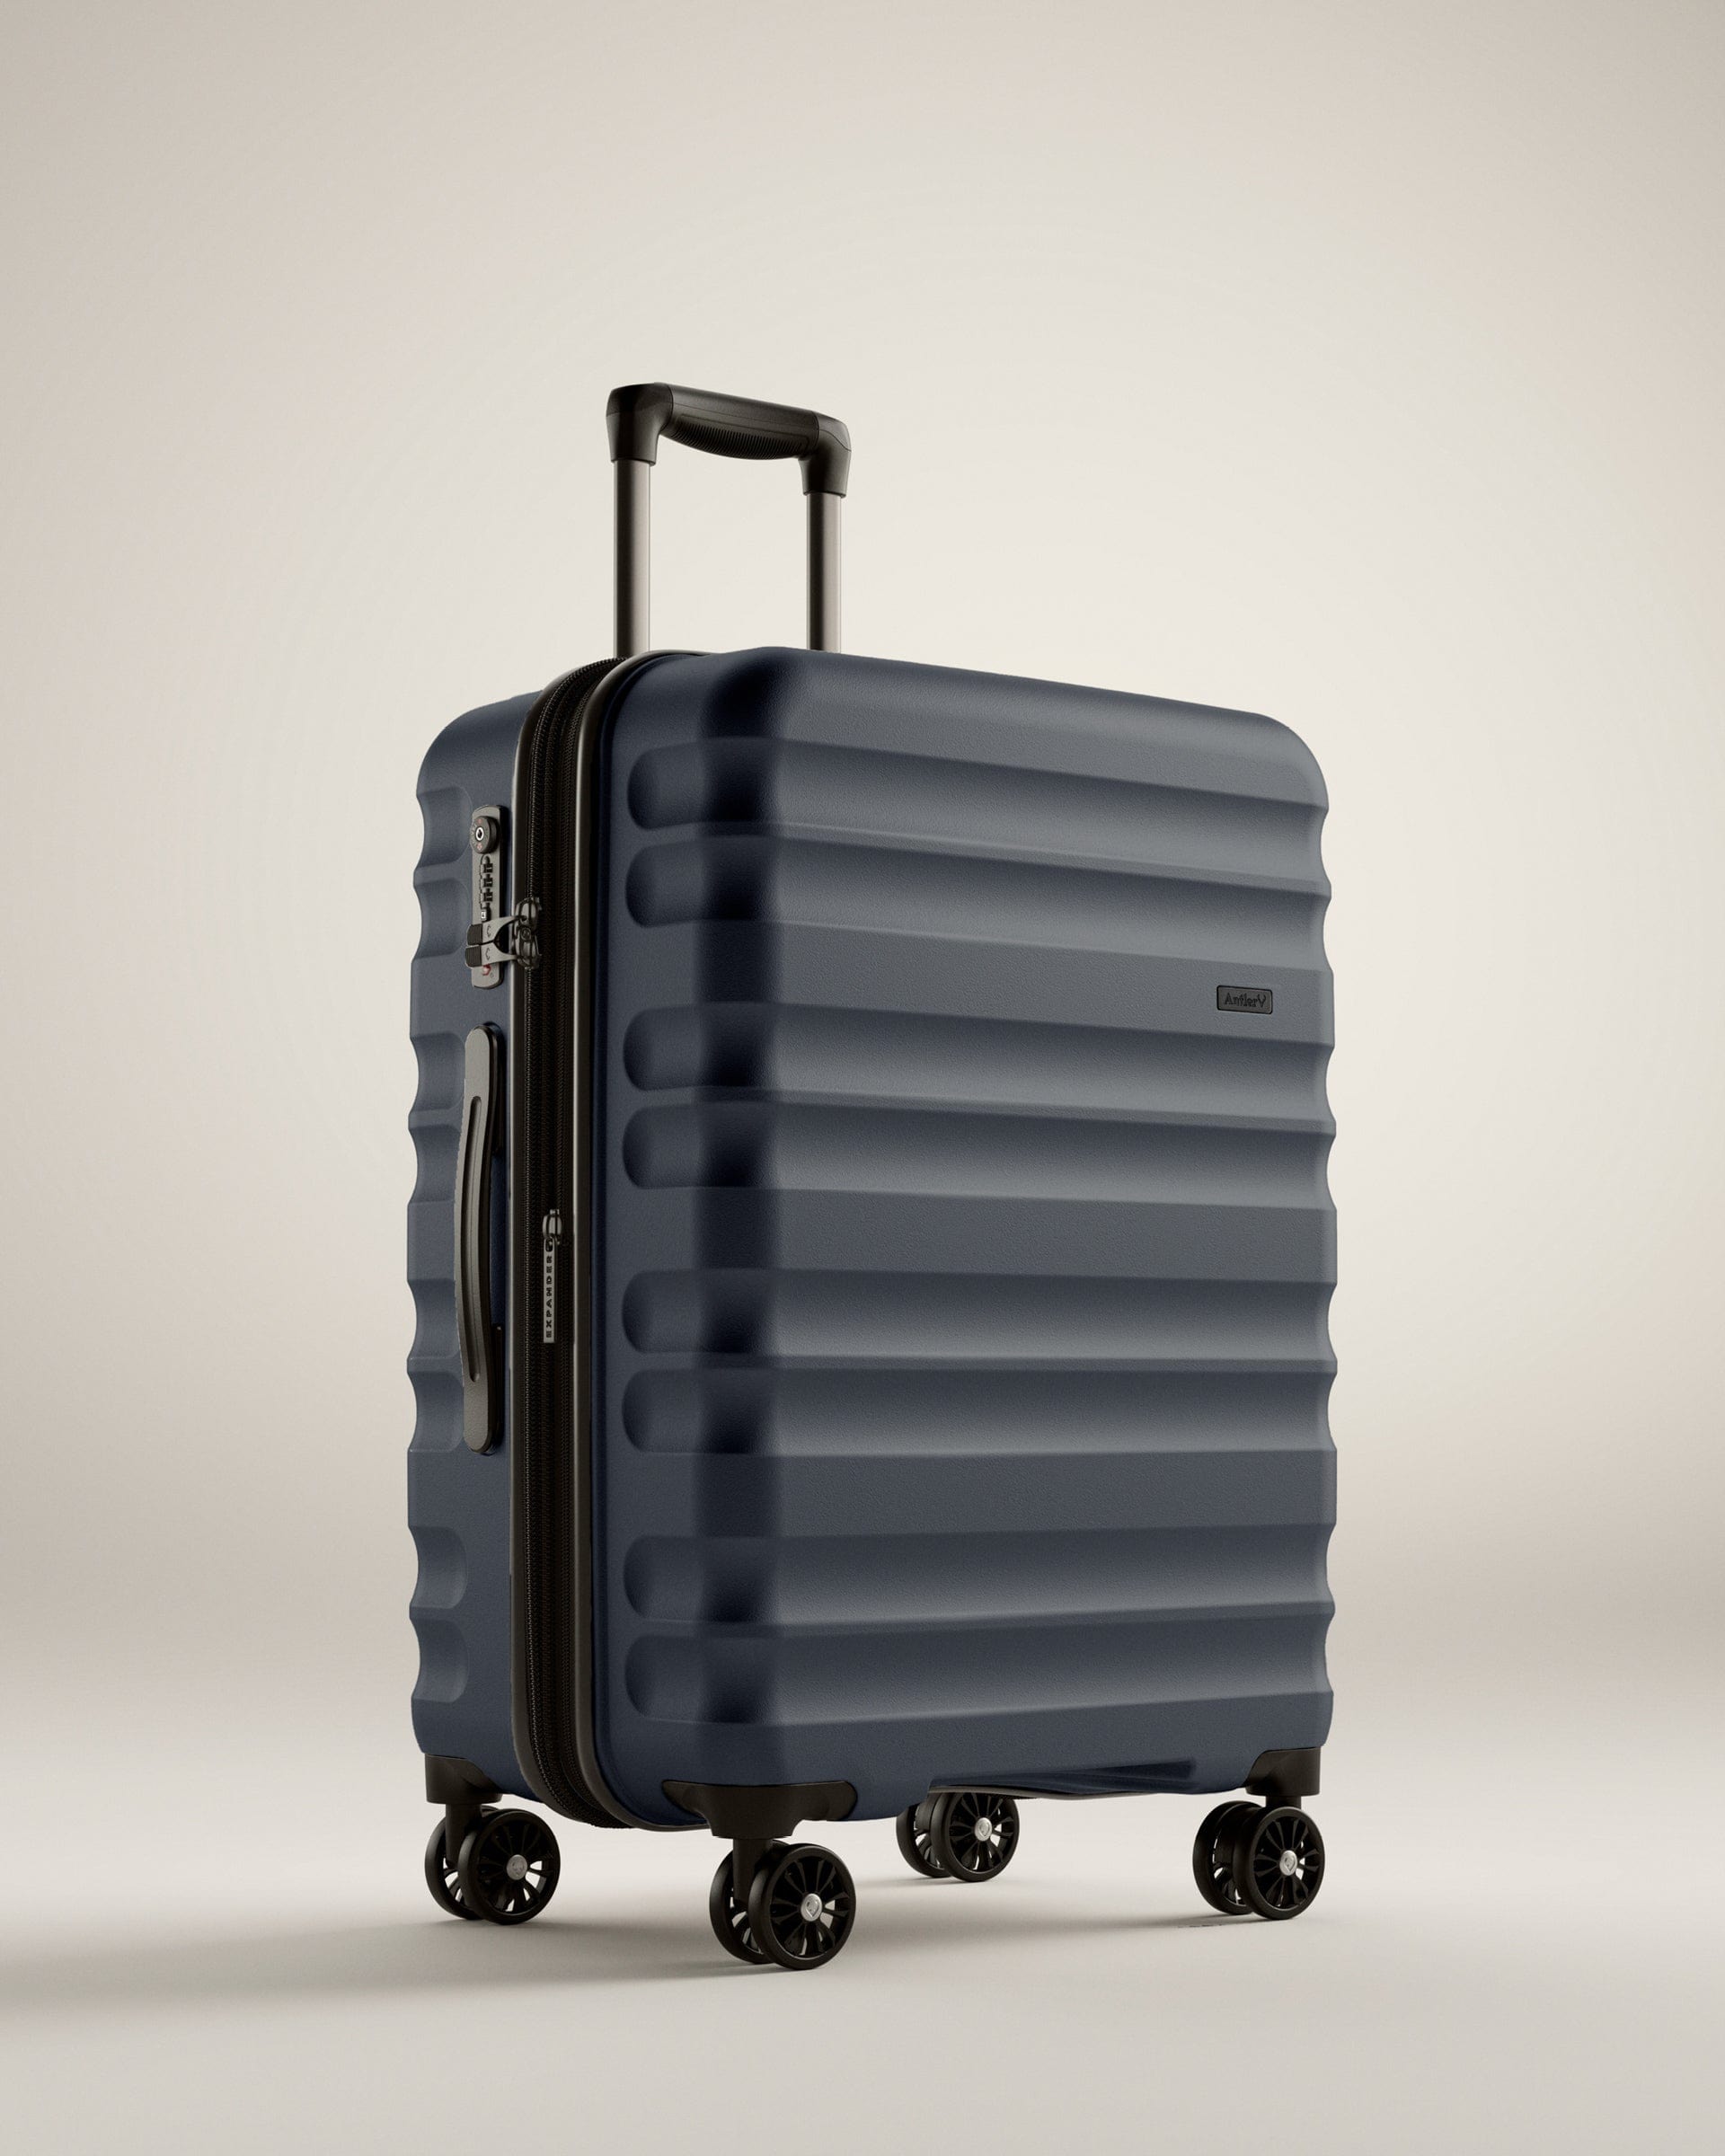 View Antler Clifton Medium Suitcase In Slate Size 30 x 45 x 67 cm information